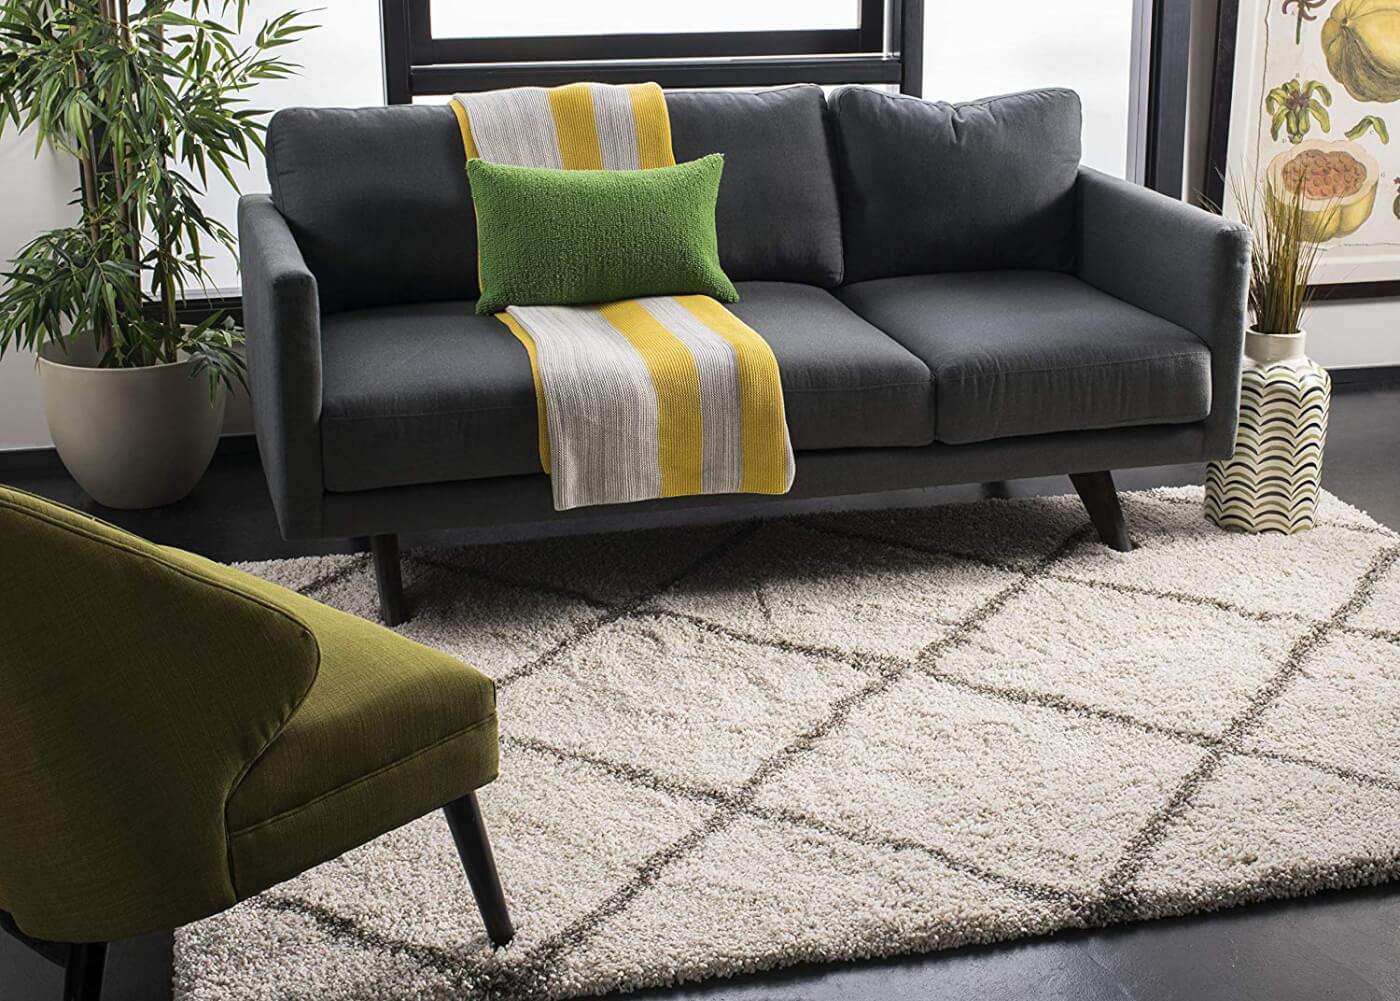 These Vegan Area Rugs Are So Comfy and Stylish | PETA Living